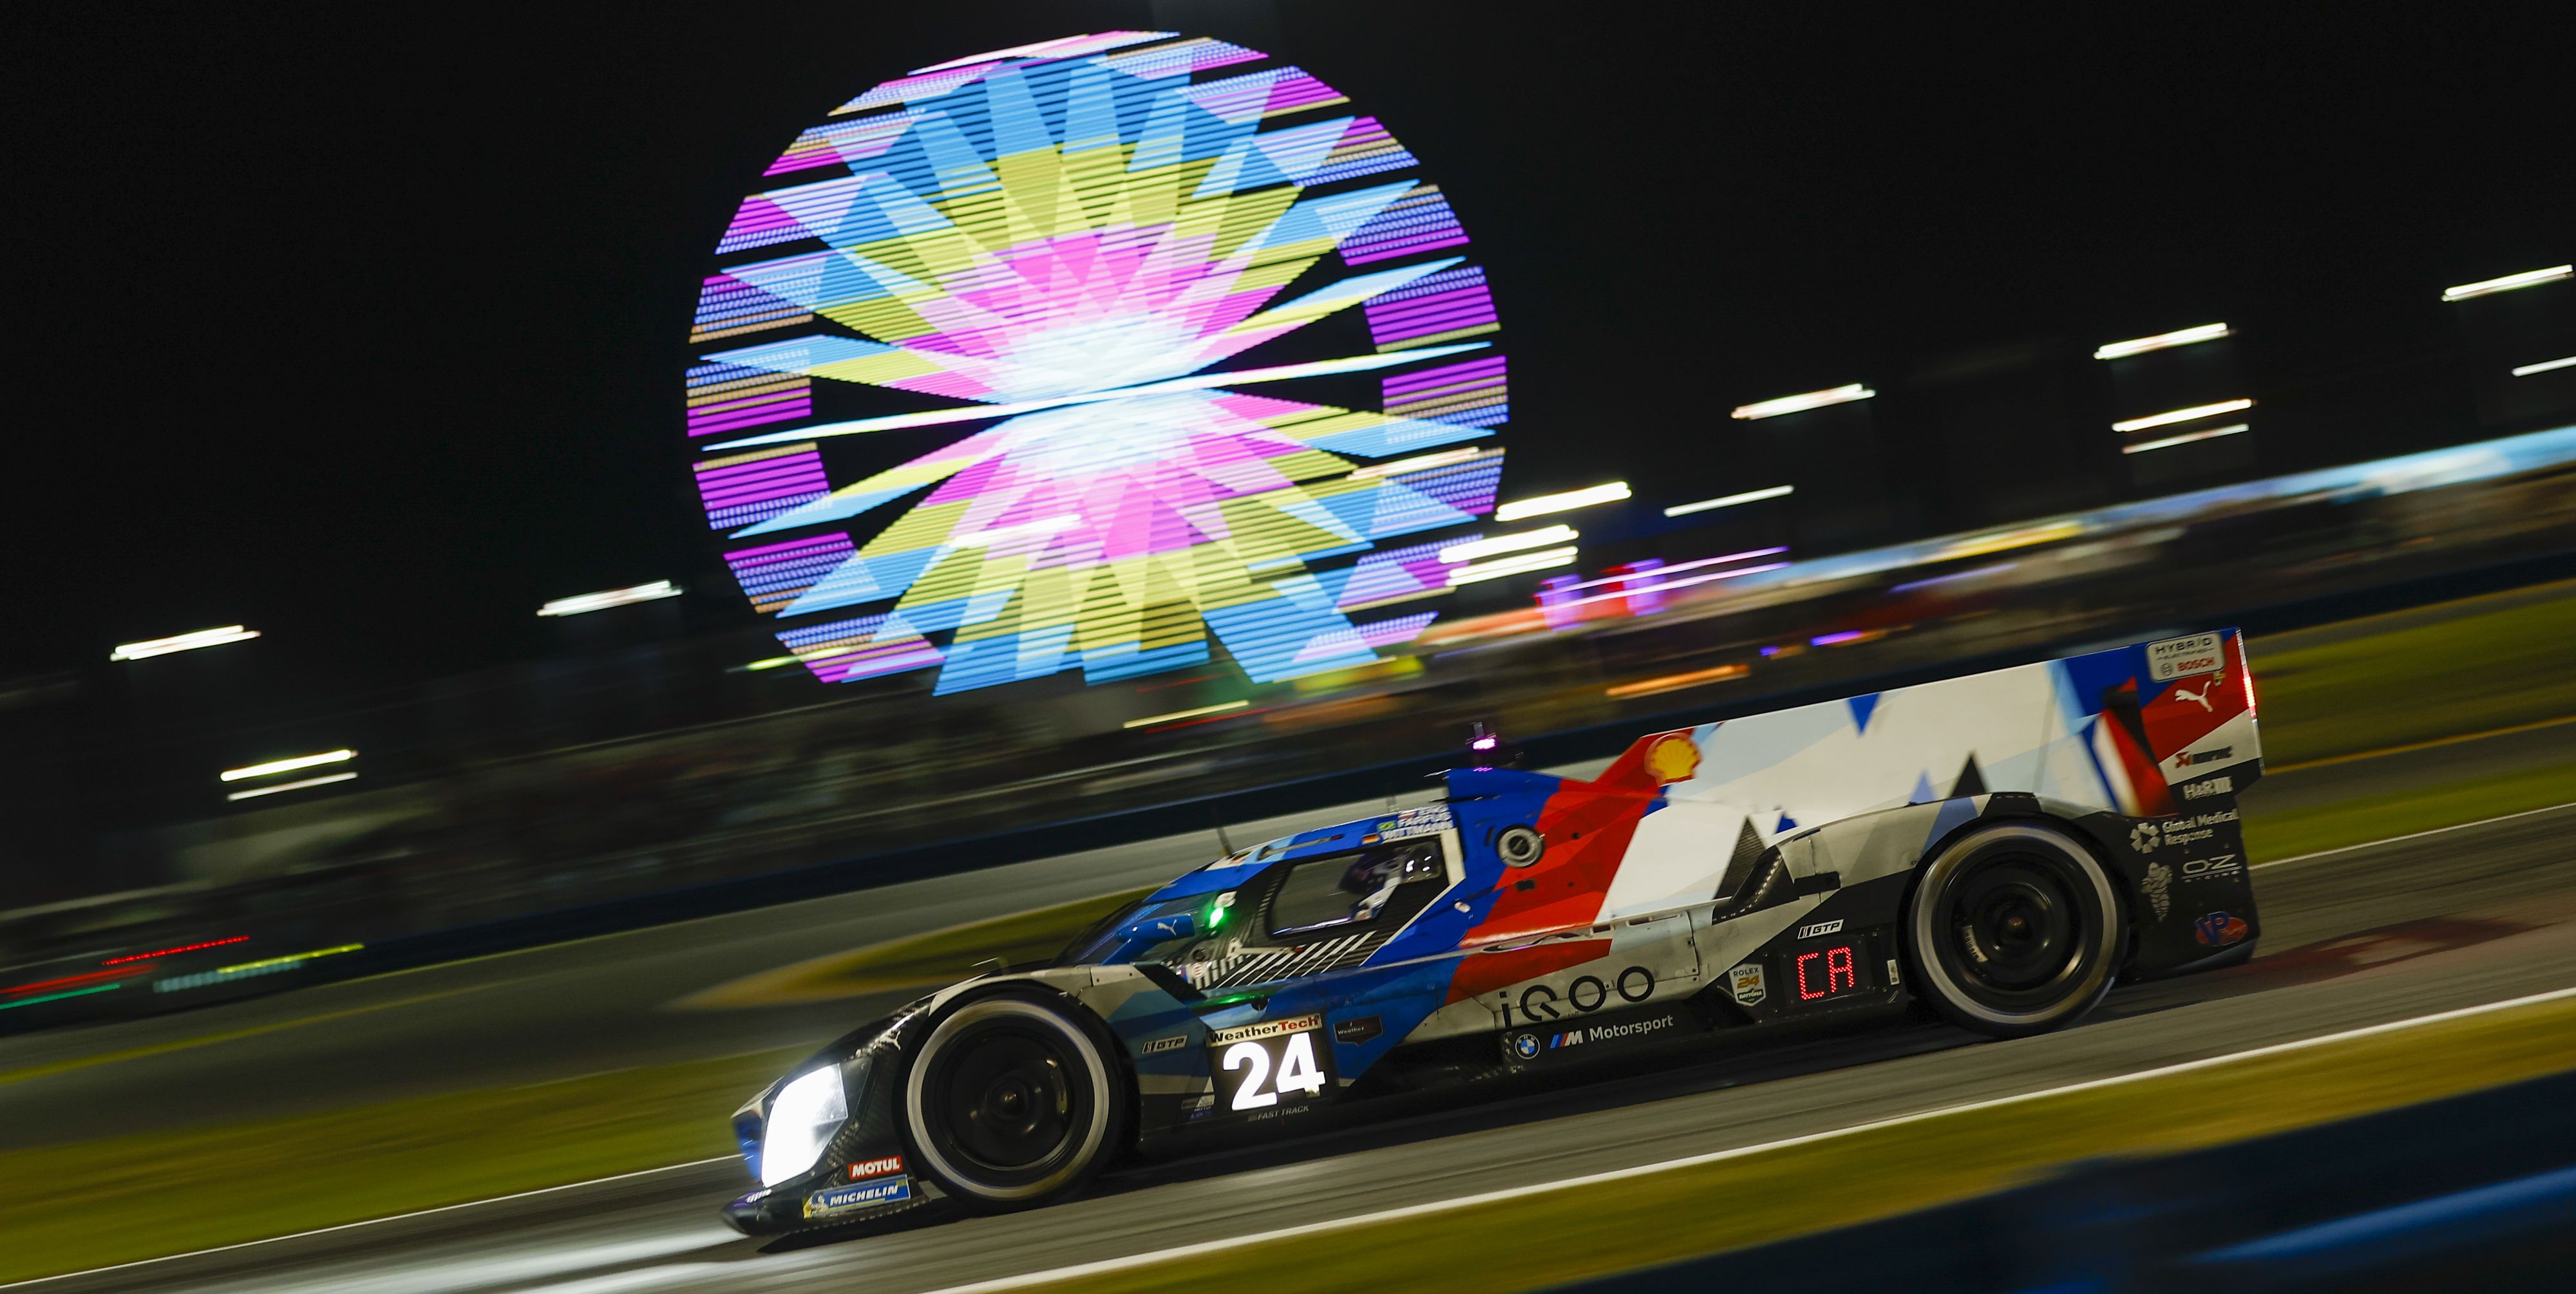 BMW Will Race a New Art Car at Le Mans